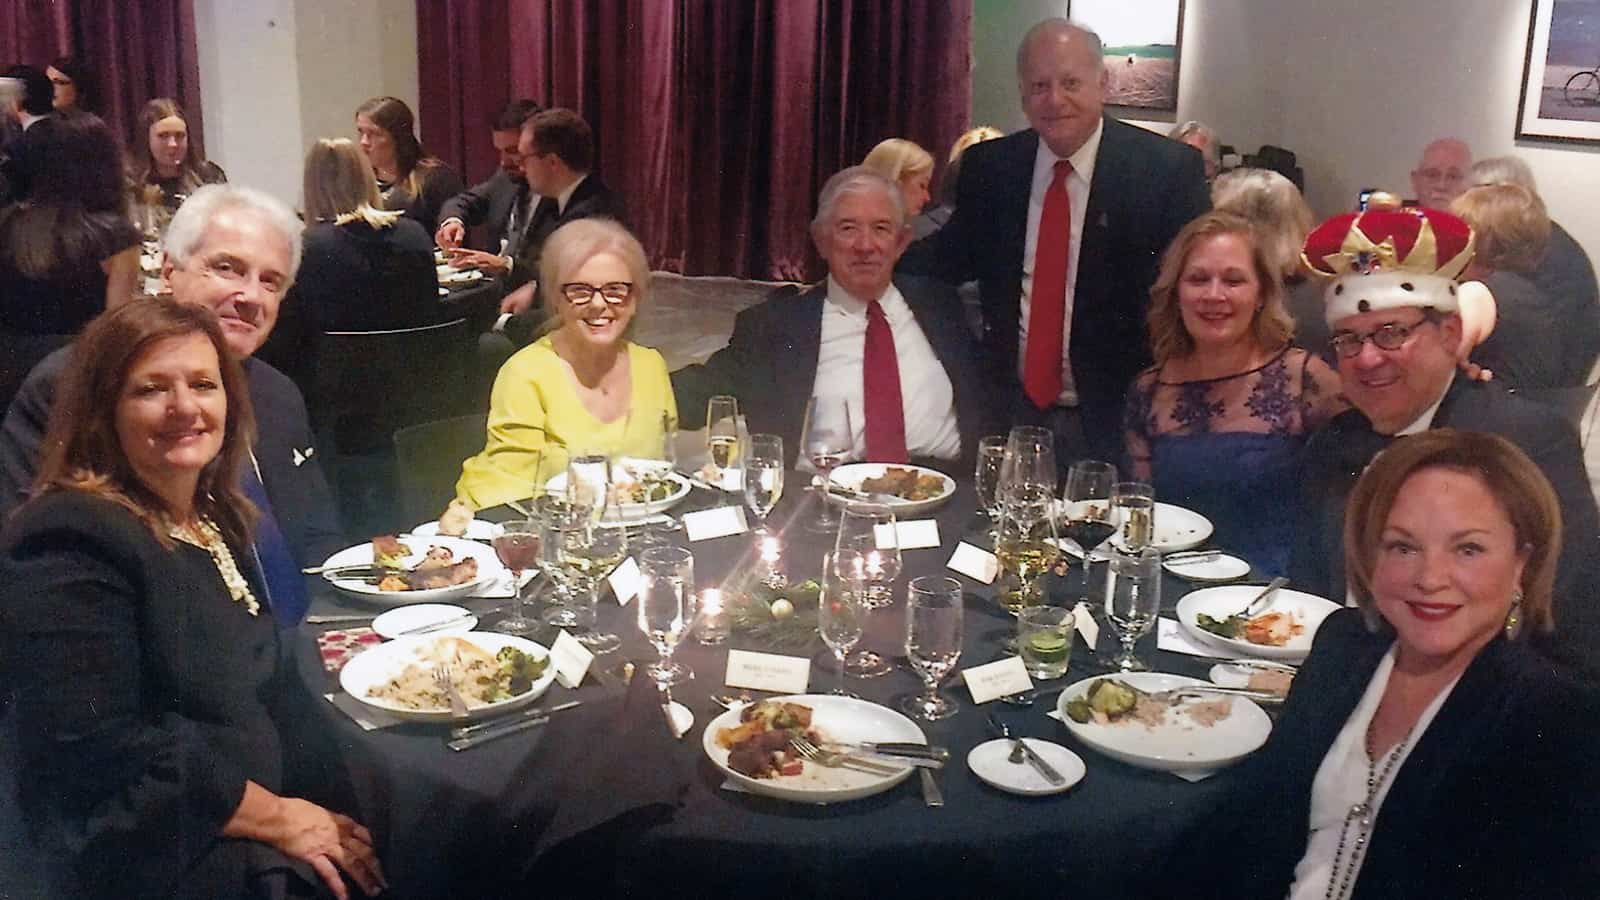 Photo of "Dirt King" Joe Lewallen sitting at the event with fellow McAfee & Taft attorneys and past "Dirt King" honorees along with their spouses.